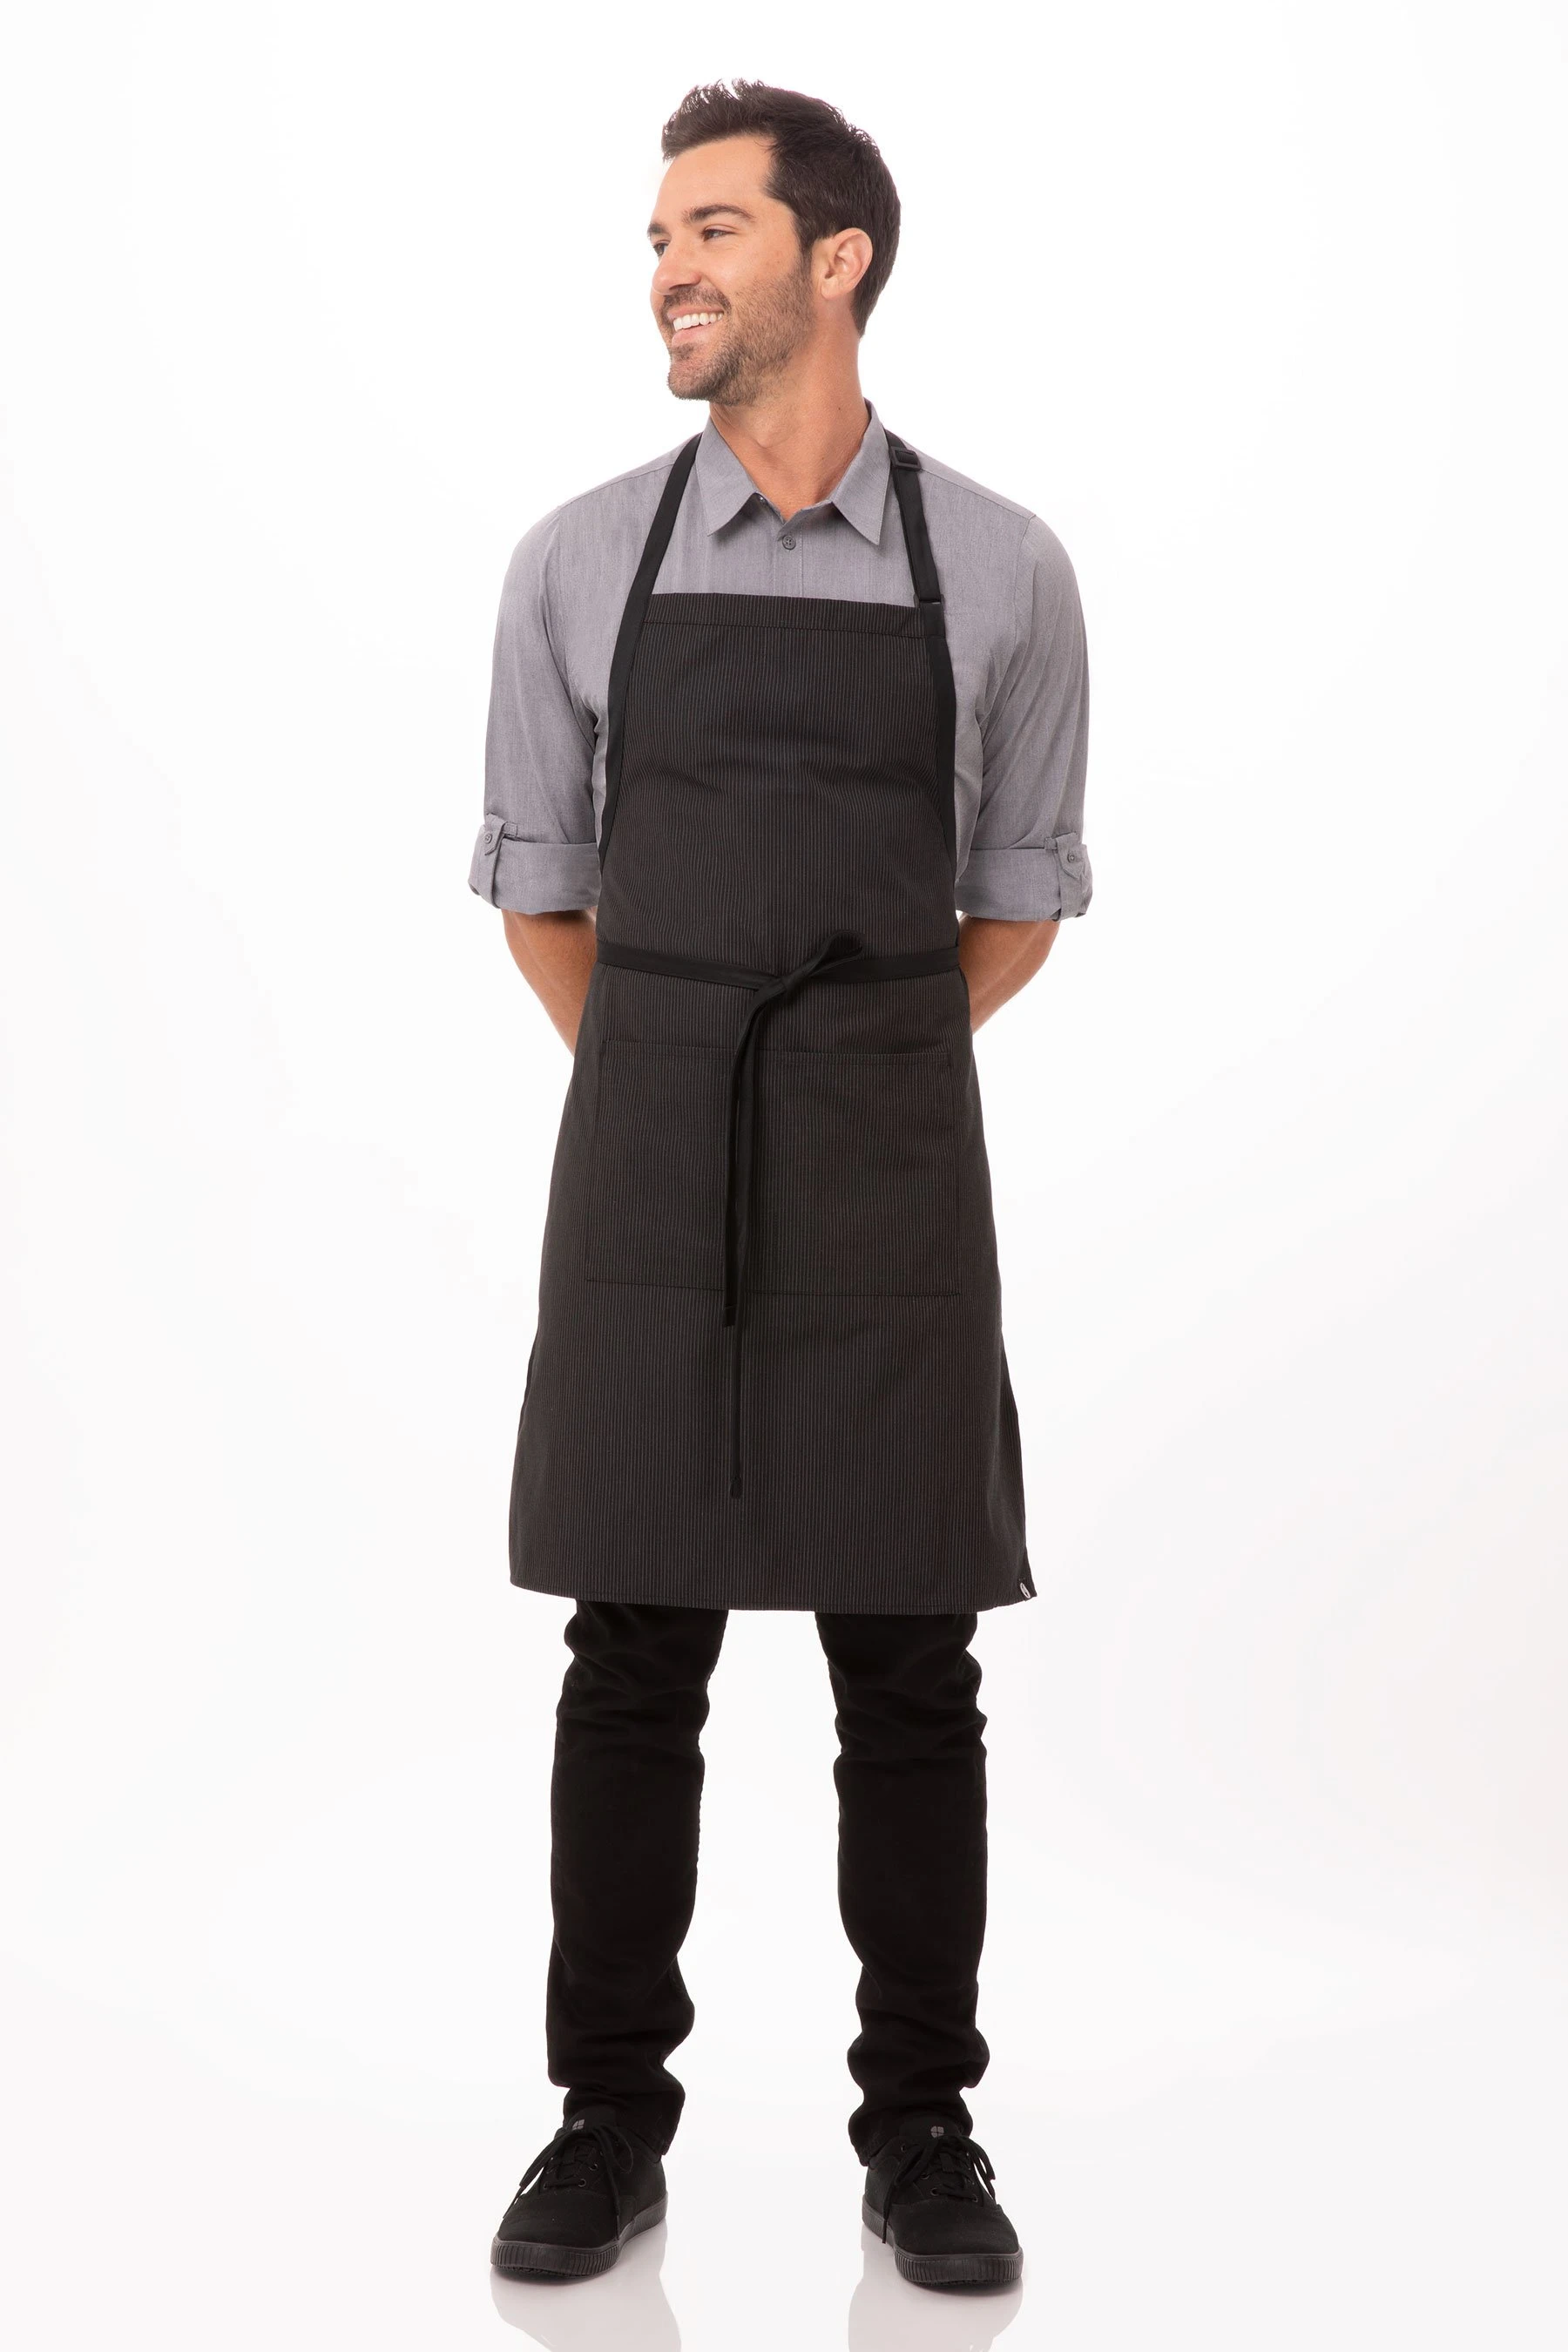 Butcher Apron with Contrasting Ties